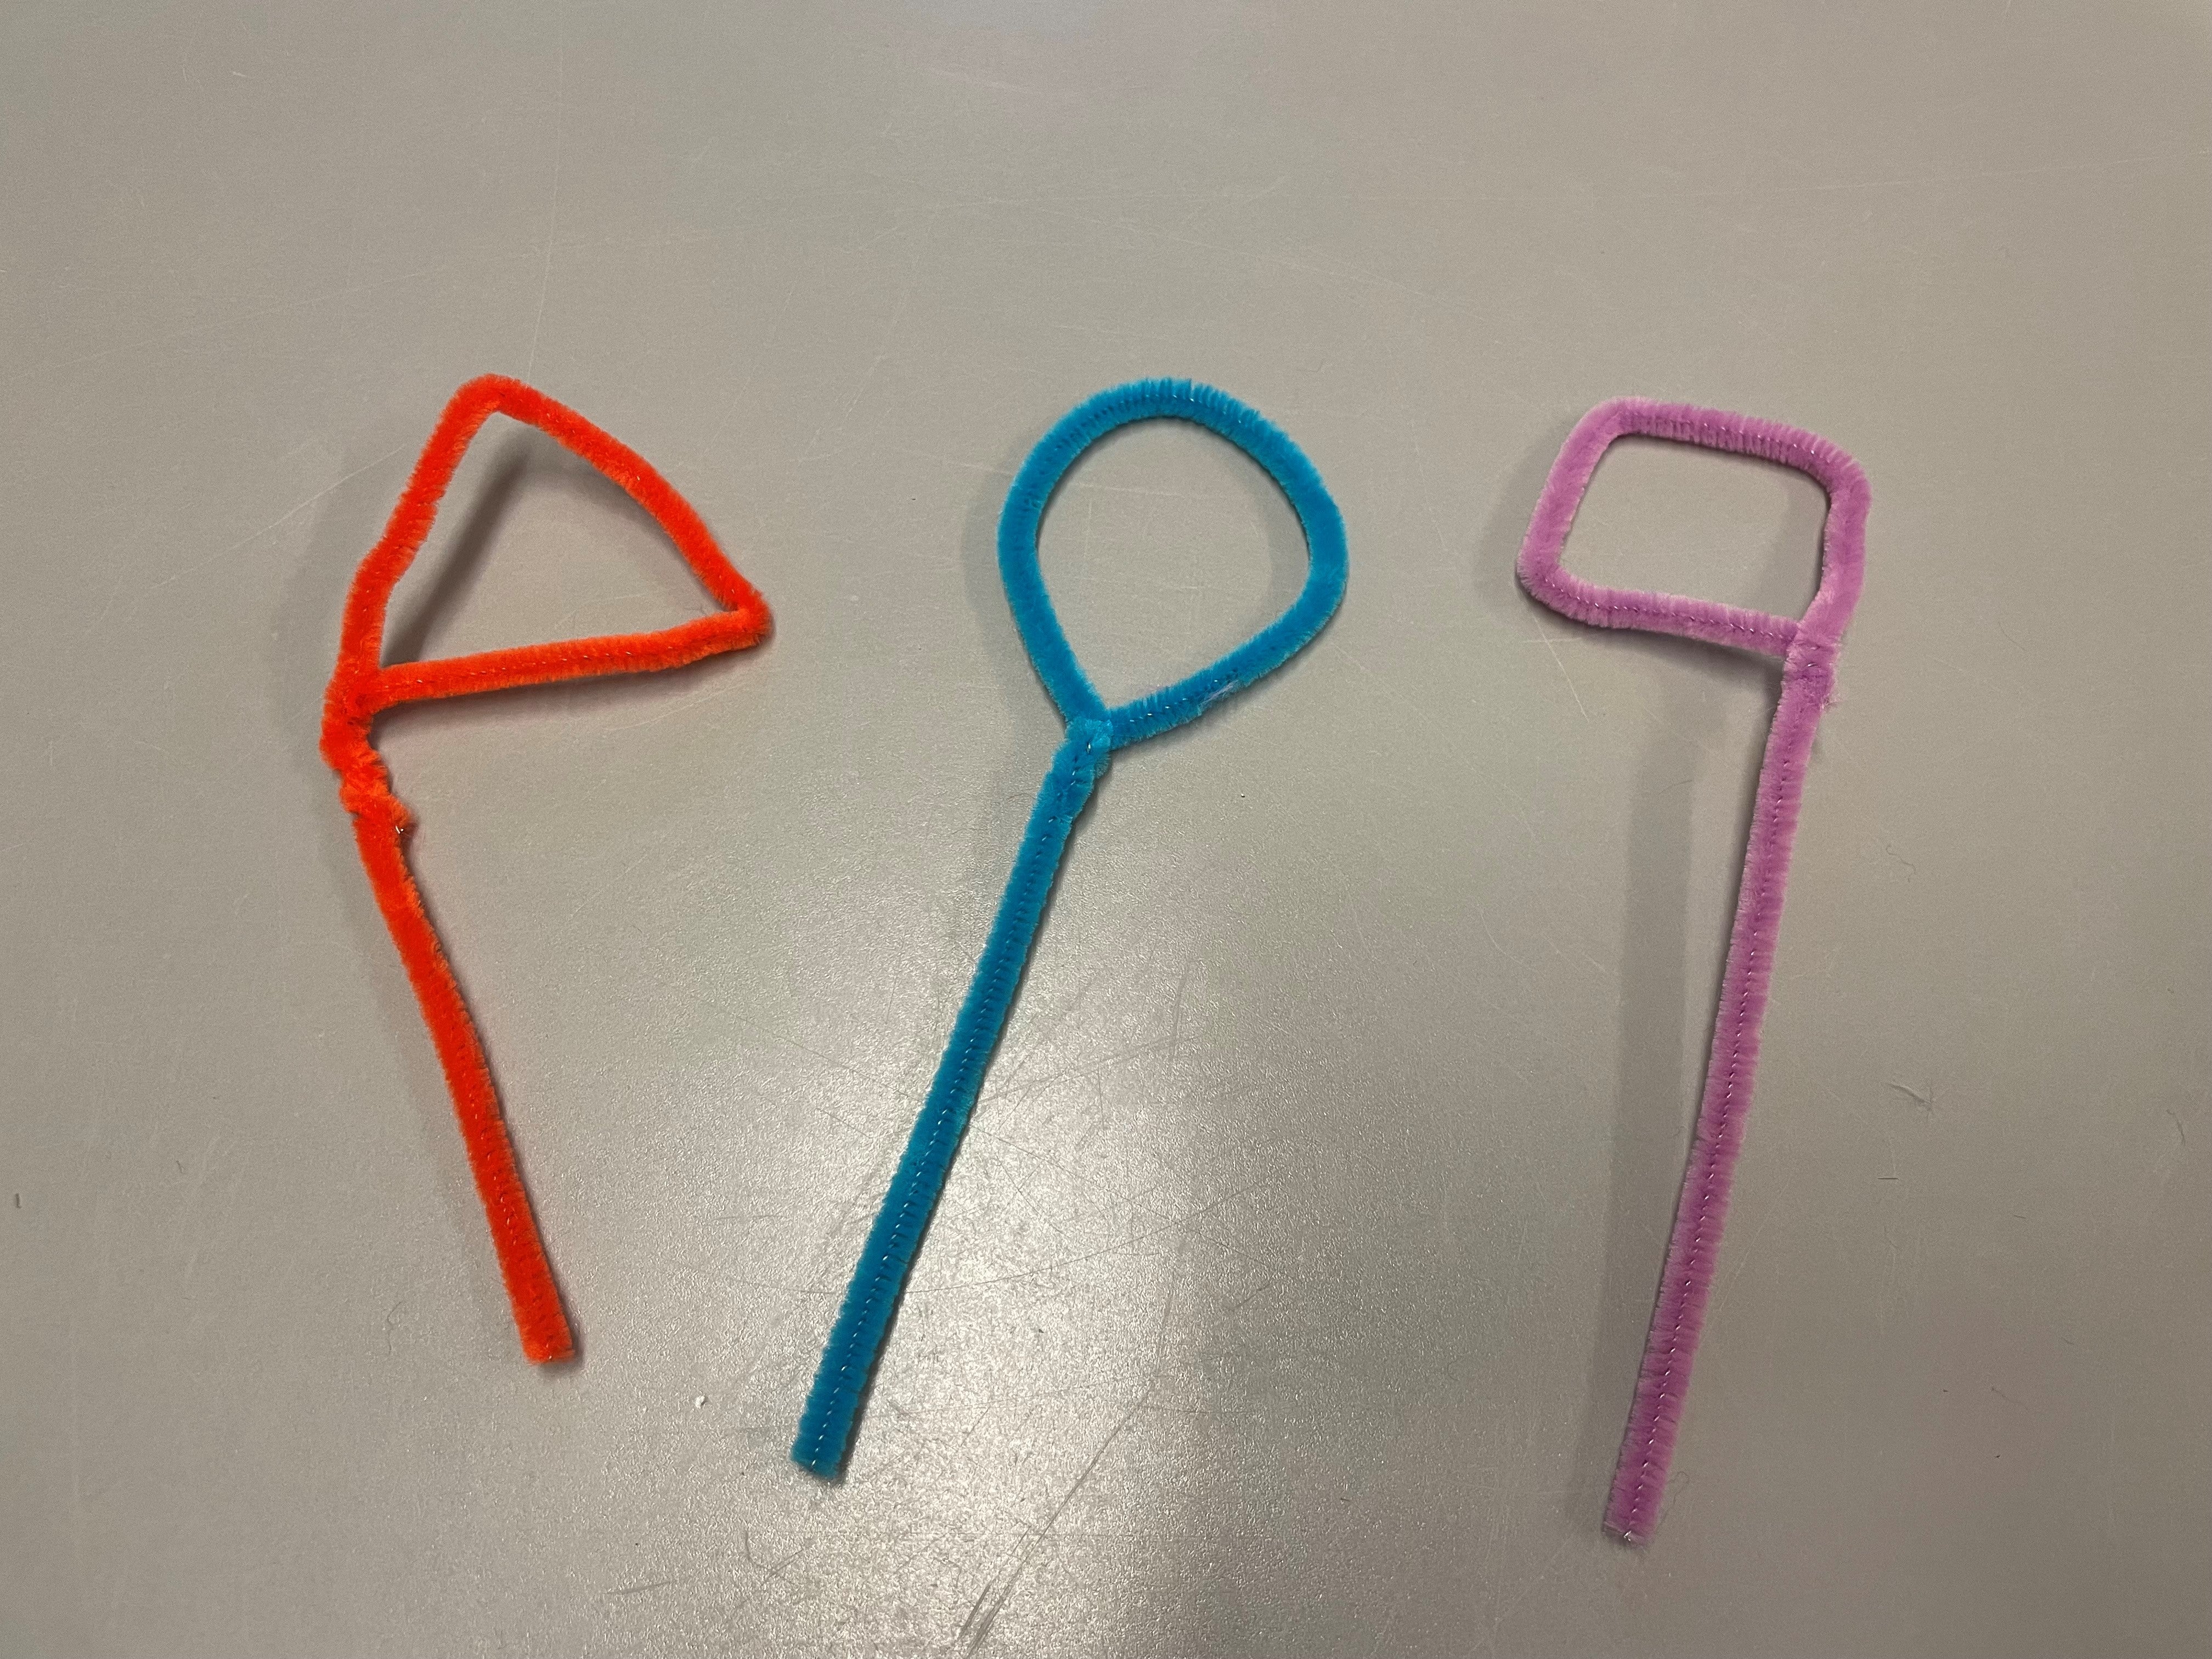 Pipe cleaners shaped into bubble wands